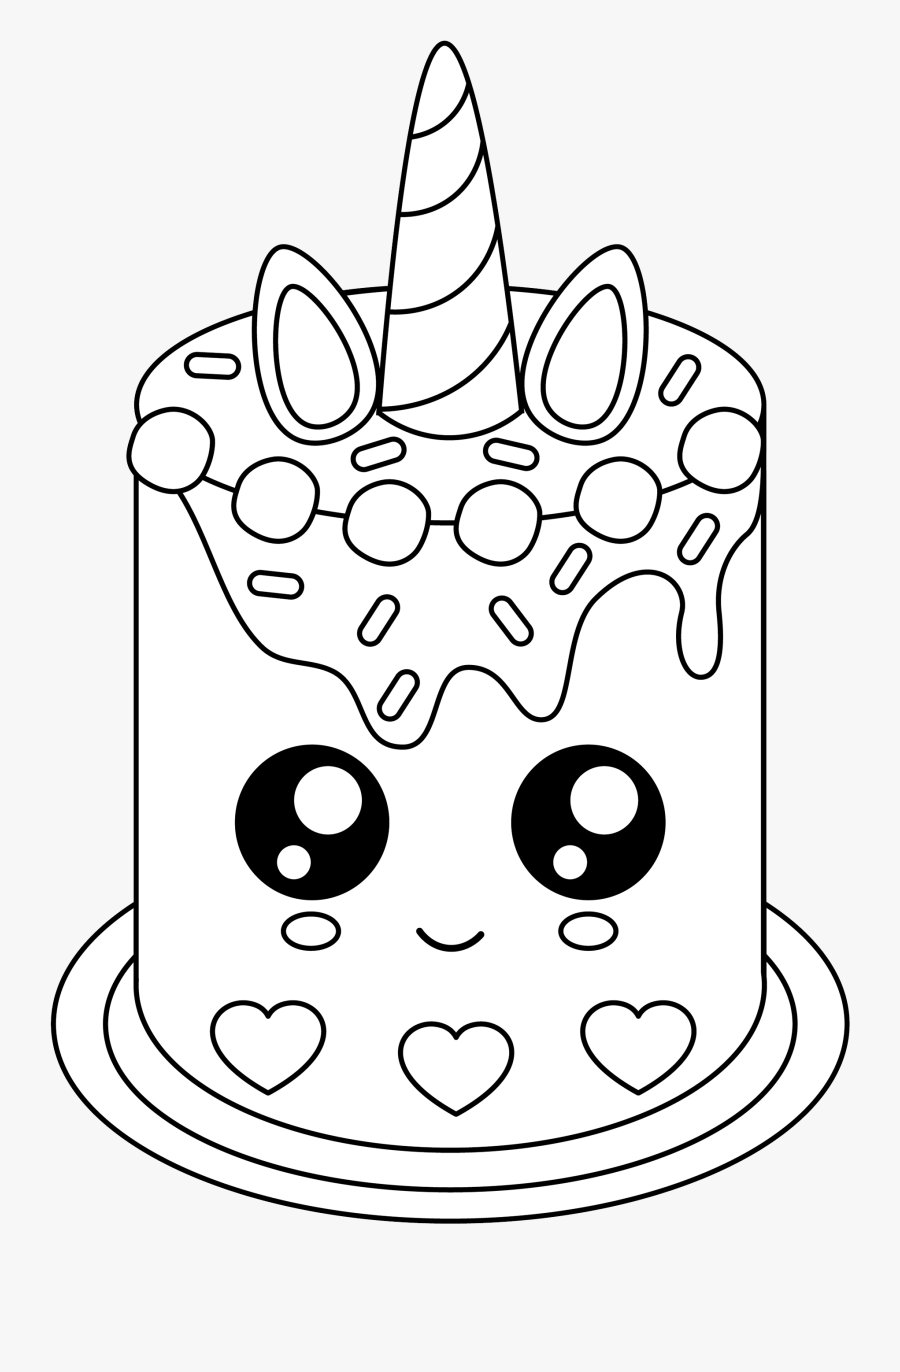 32+ Awesome Image of Birthday Cake Drawing - entitlementtrap.com | Birthday  coloring pages, Cake drawing, Happy birthday cakes